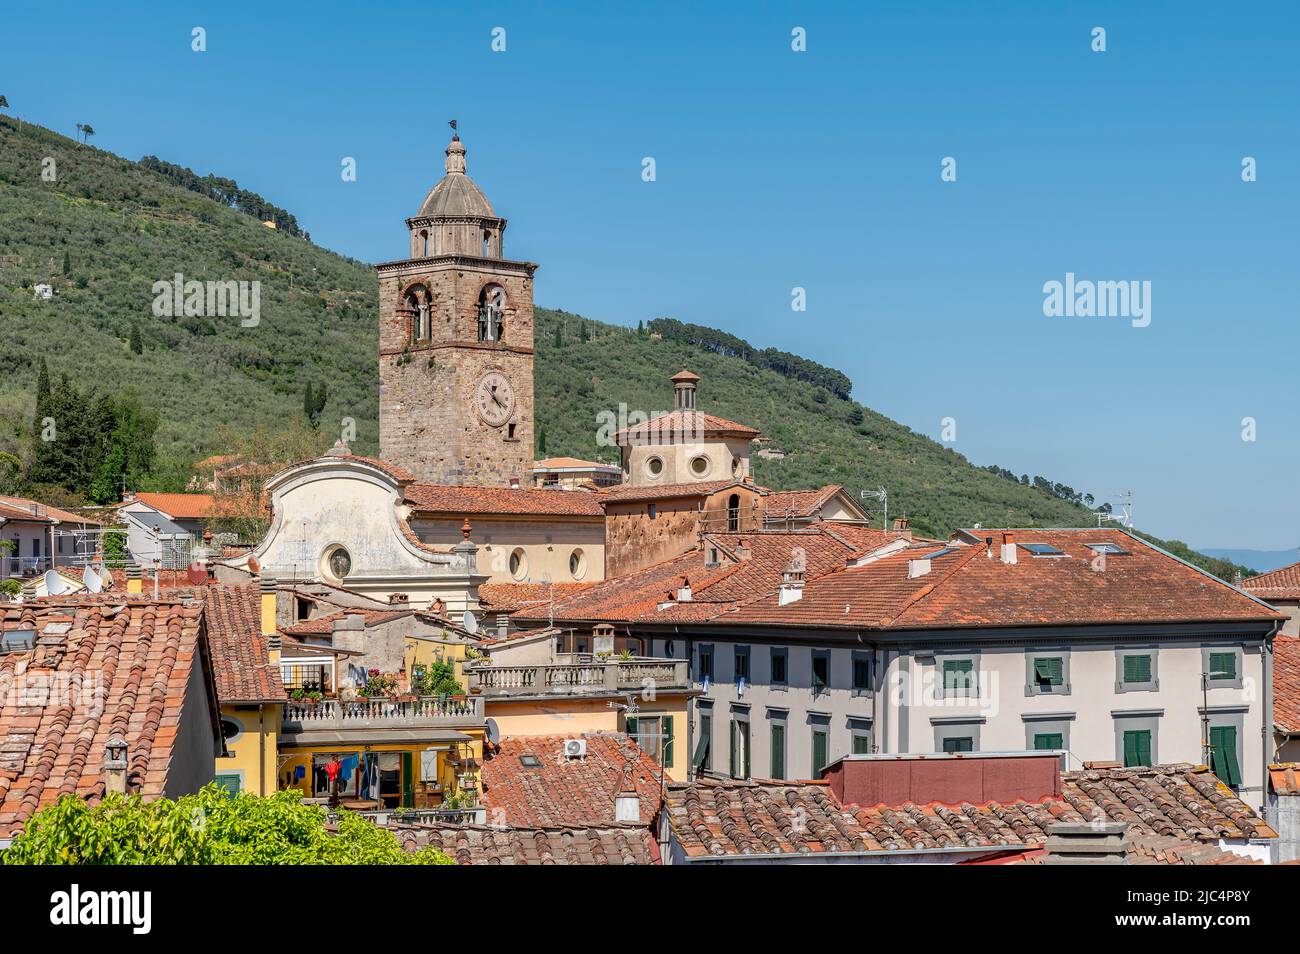 Aerial view of the historic center of Buti, Pisa, Italy Stock Photo